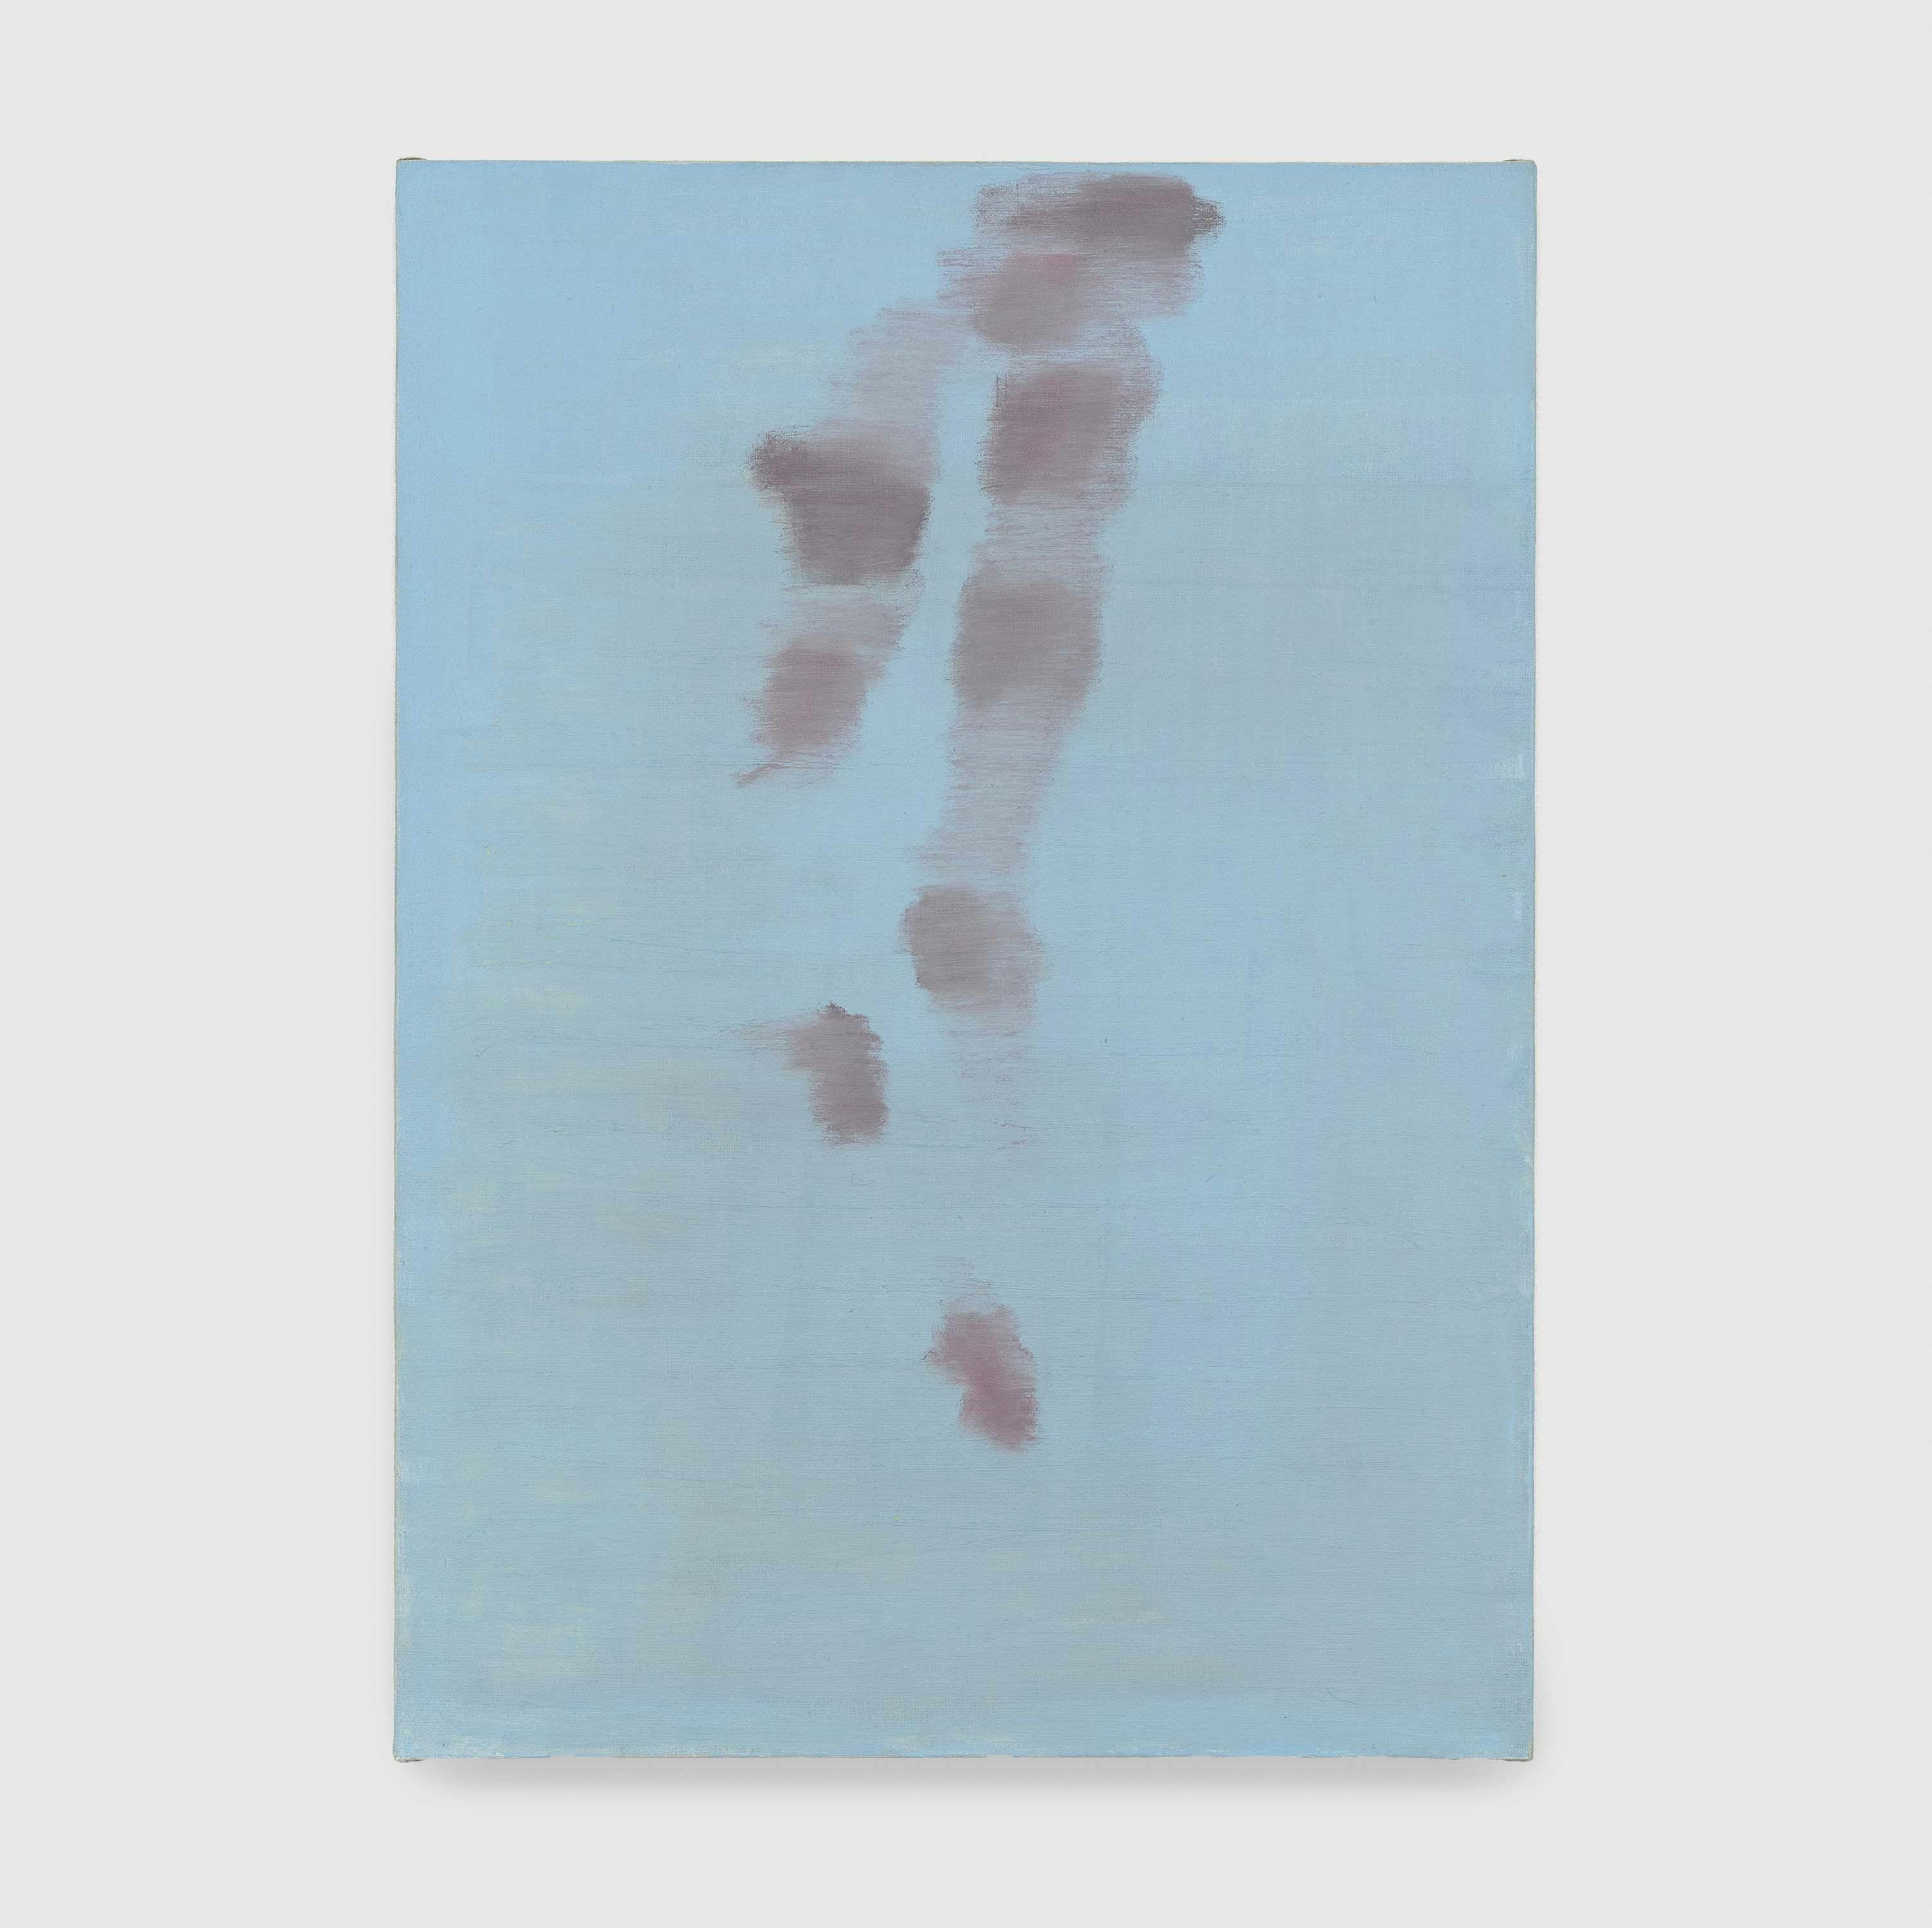 A painting by Raoul De Keyser, titled Untitled (Suggestion), dated 1995.